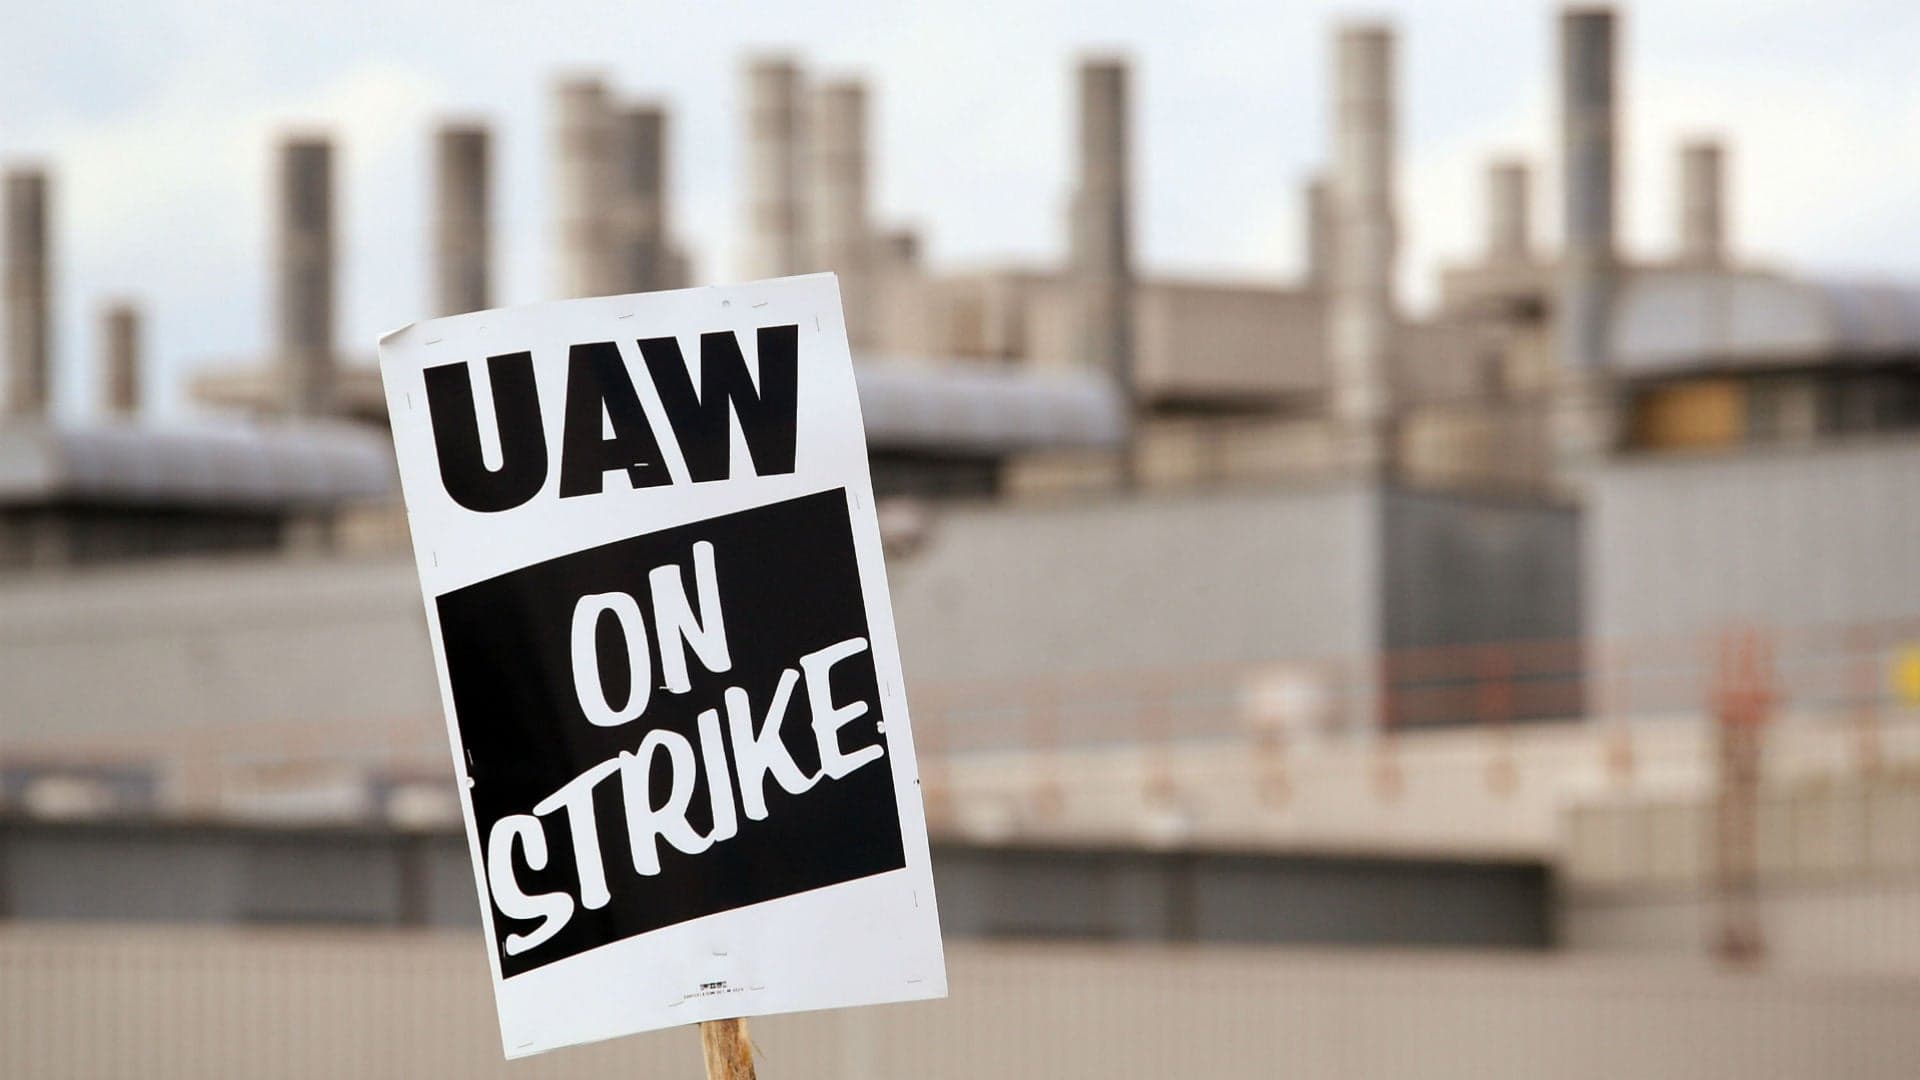 46,000 GM Employees Ready to Strike After UAW Contract Expires Without New Deal